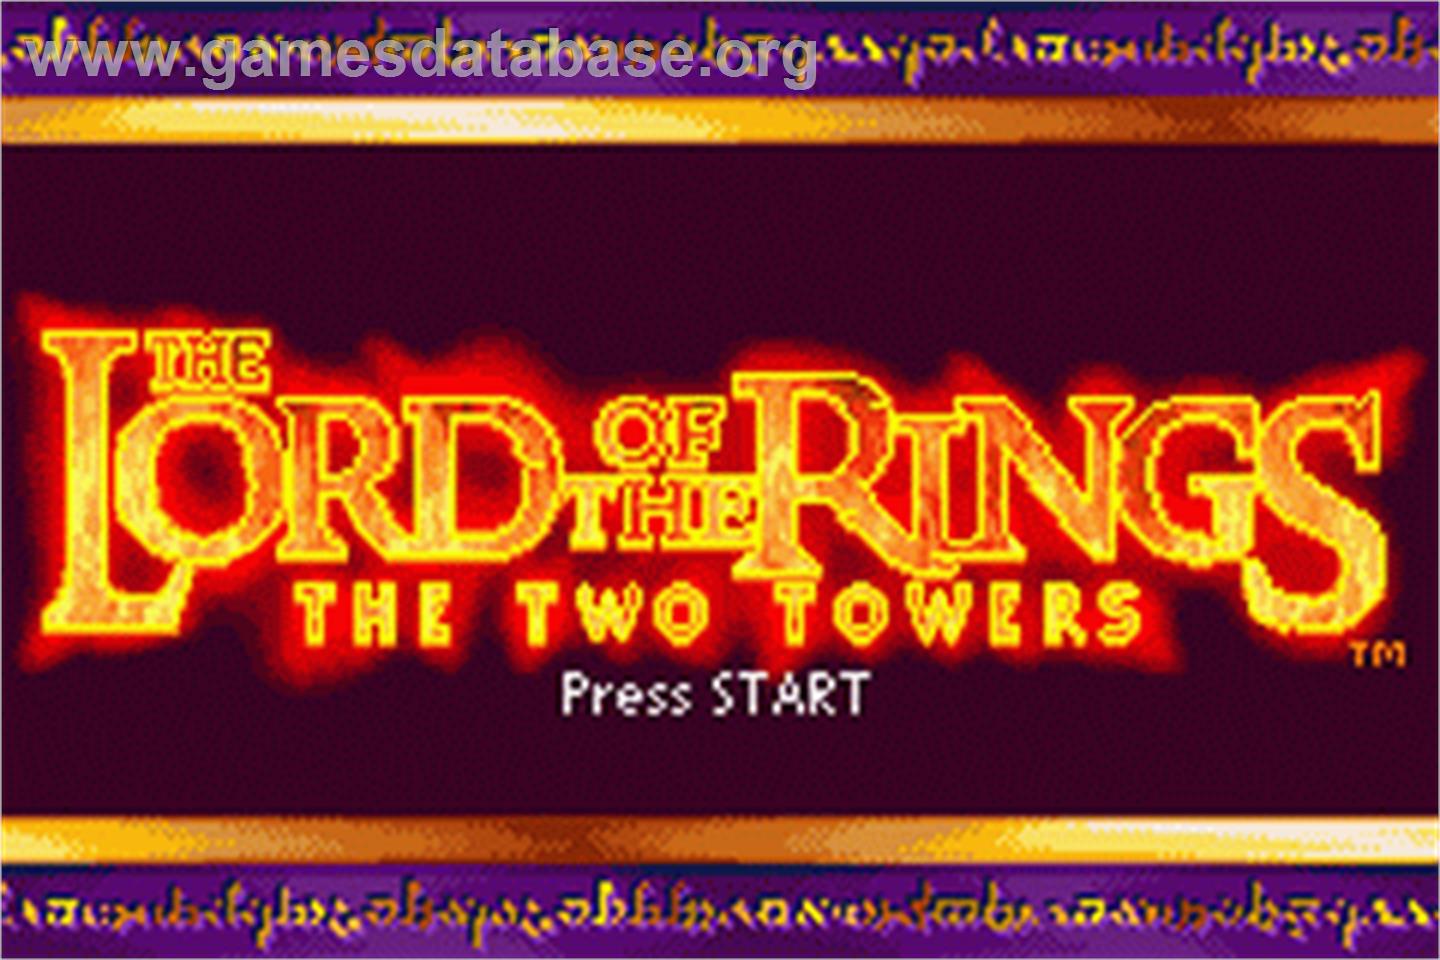 Lord of the Rings: The Two Towers - Nintendo Game Boy Advance - Artwork - Title Screen